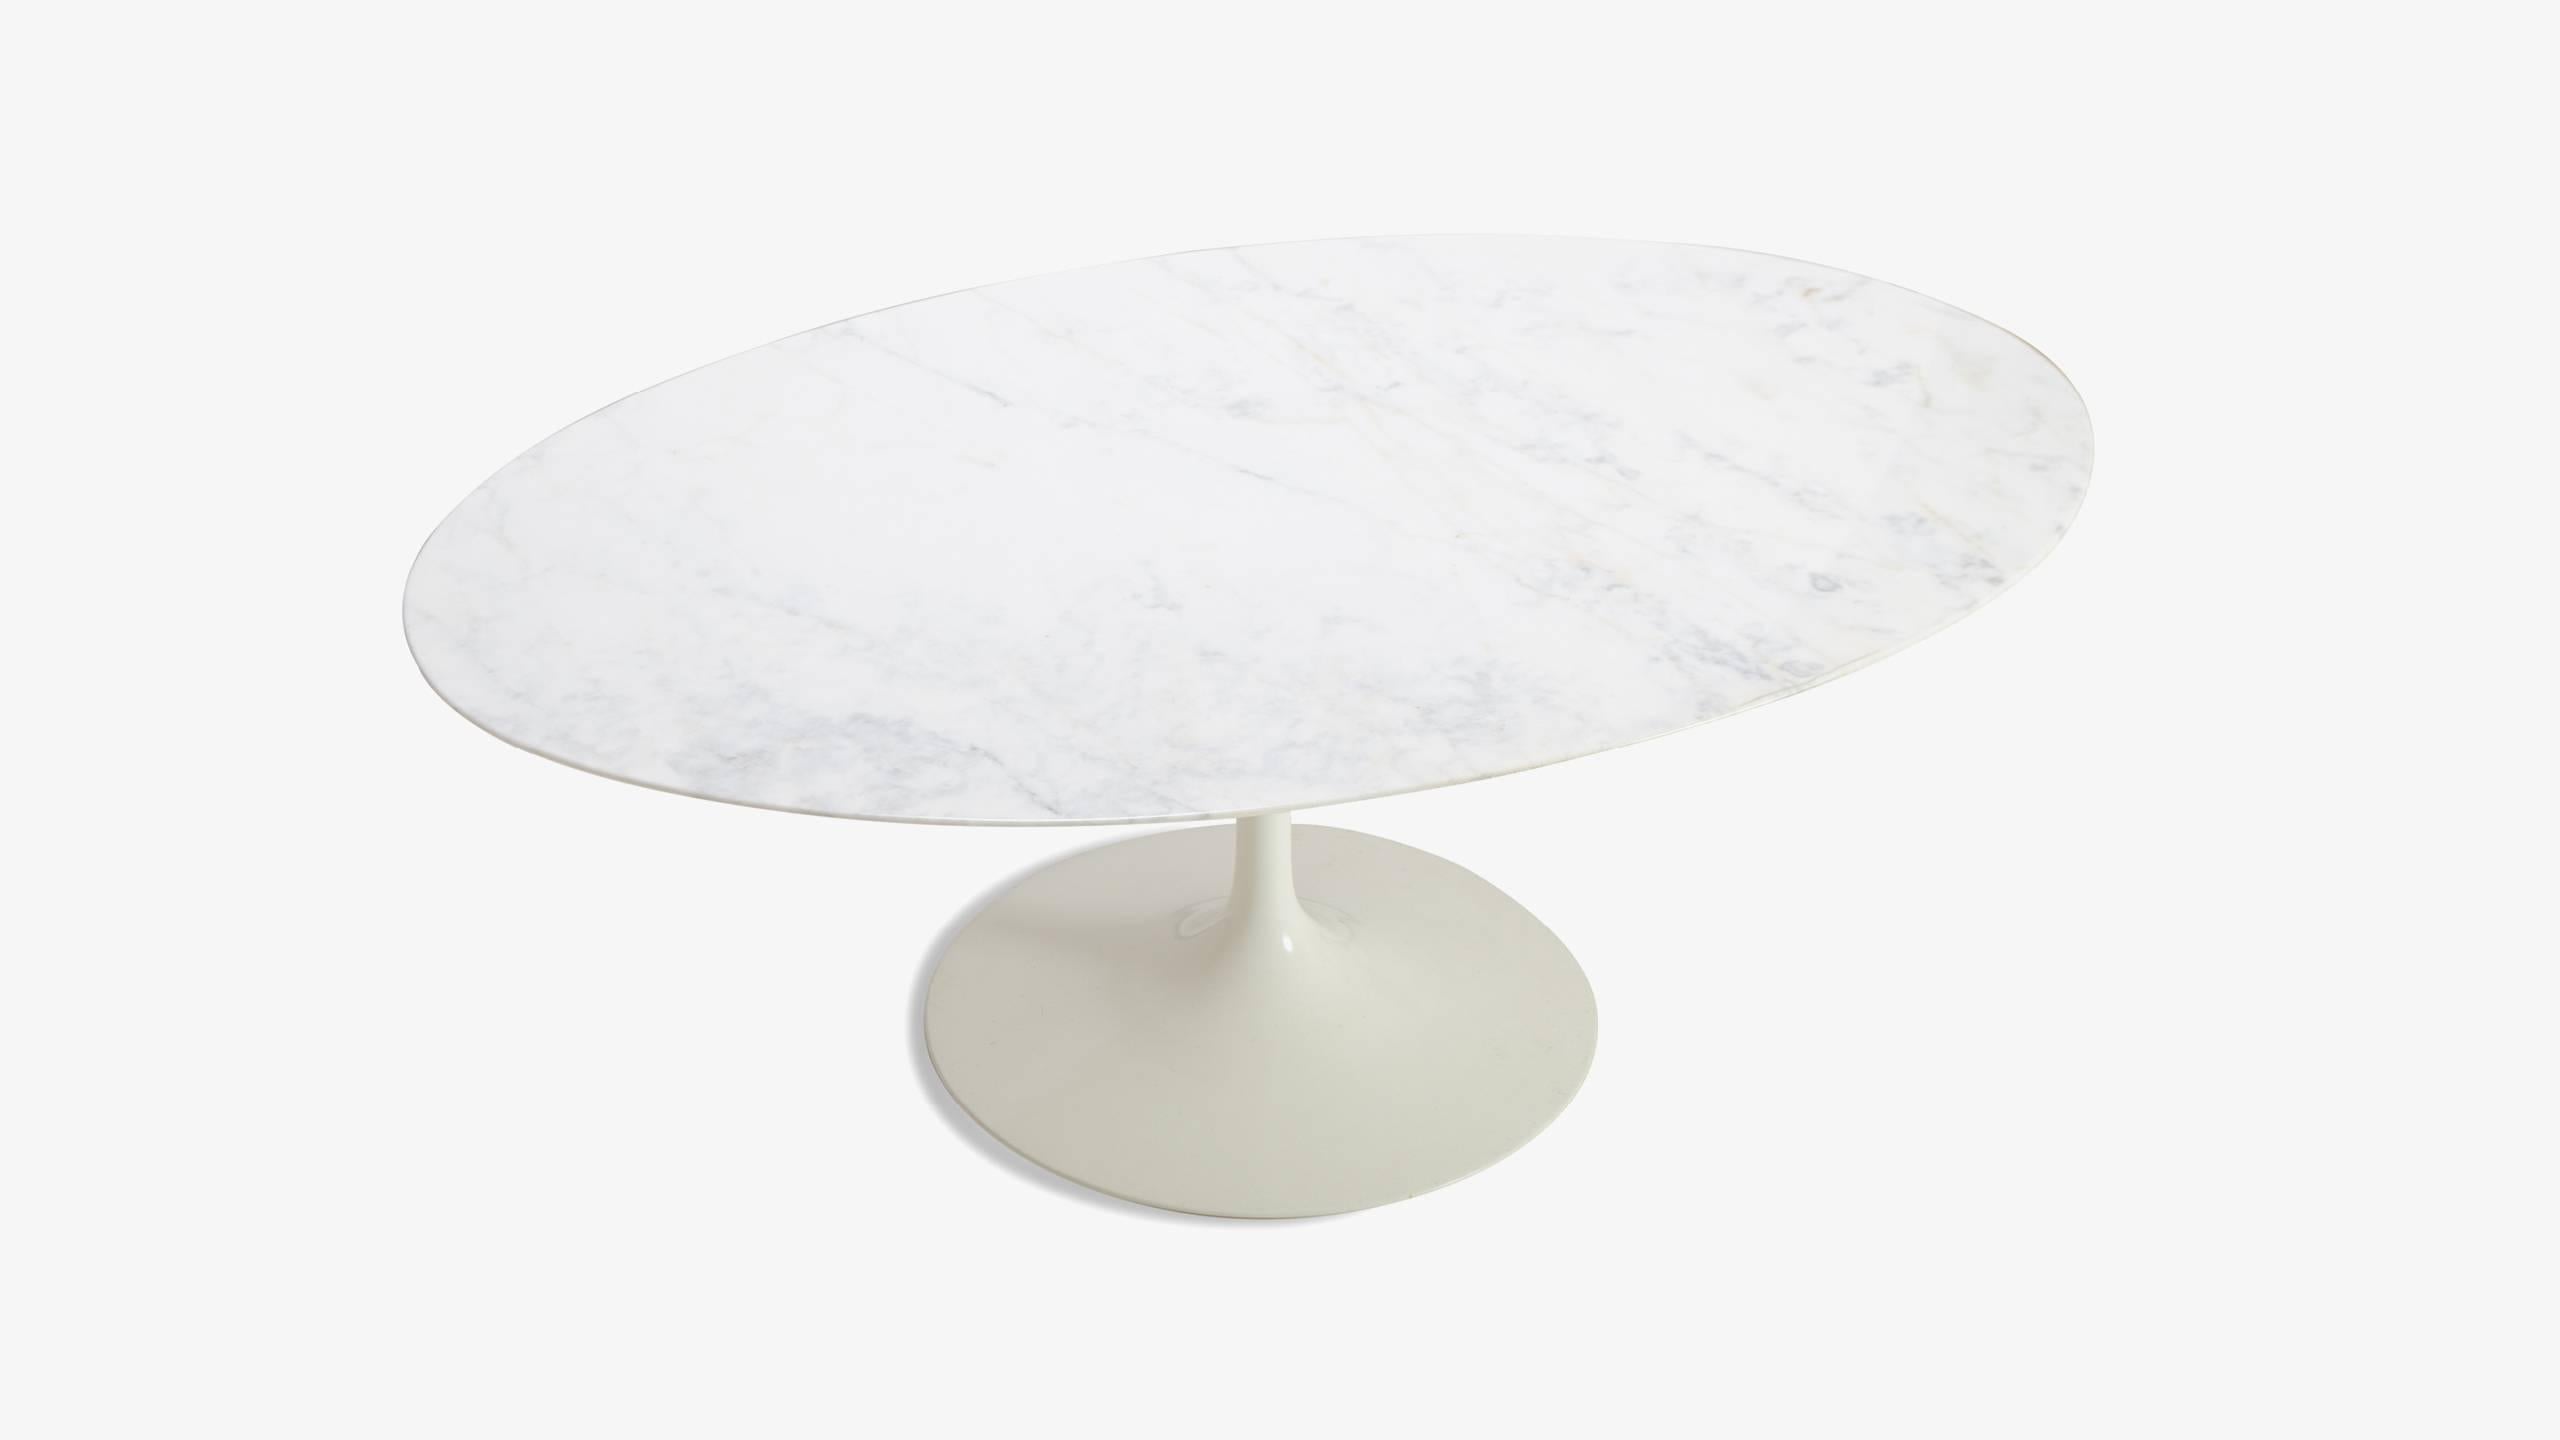 The Pedestal Collection was Eero Saarinen's design revolution and very much the face of Mid-Century design, The classic coffee table is an easy fit to a home of any aesthetic. Its perfect proportions and smooth curved lines make it a visually